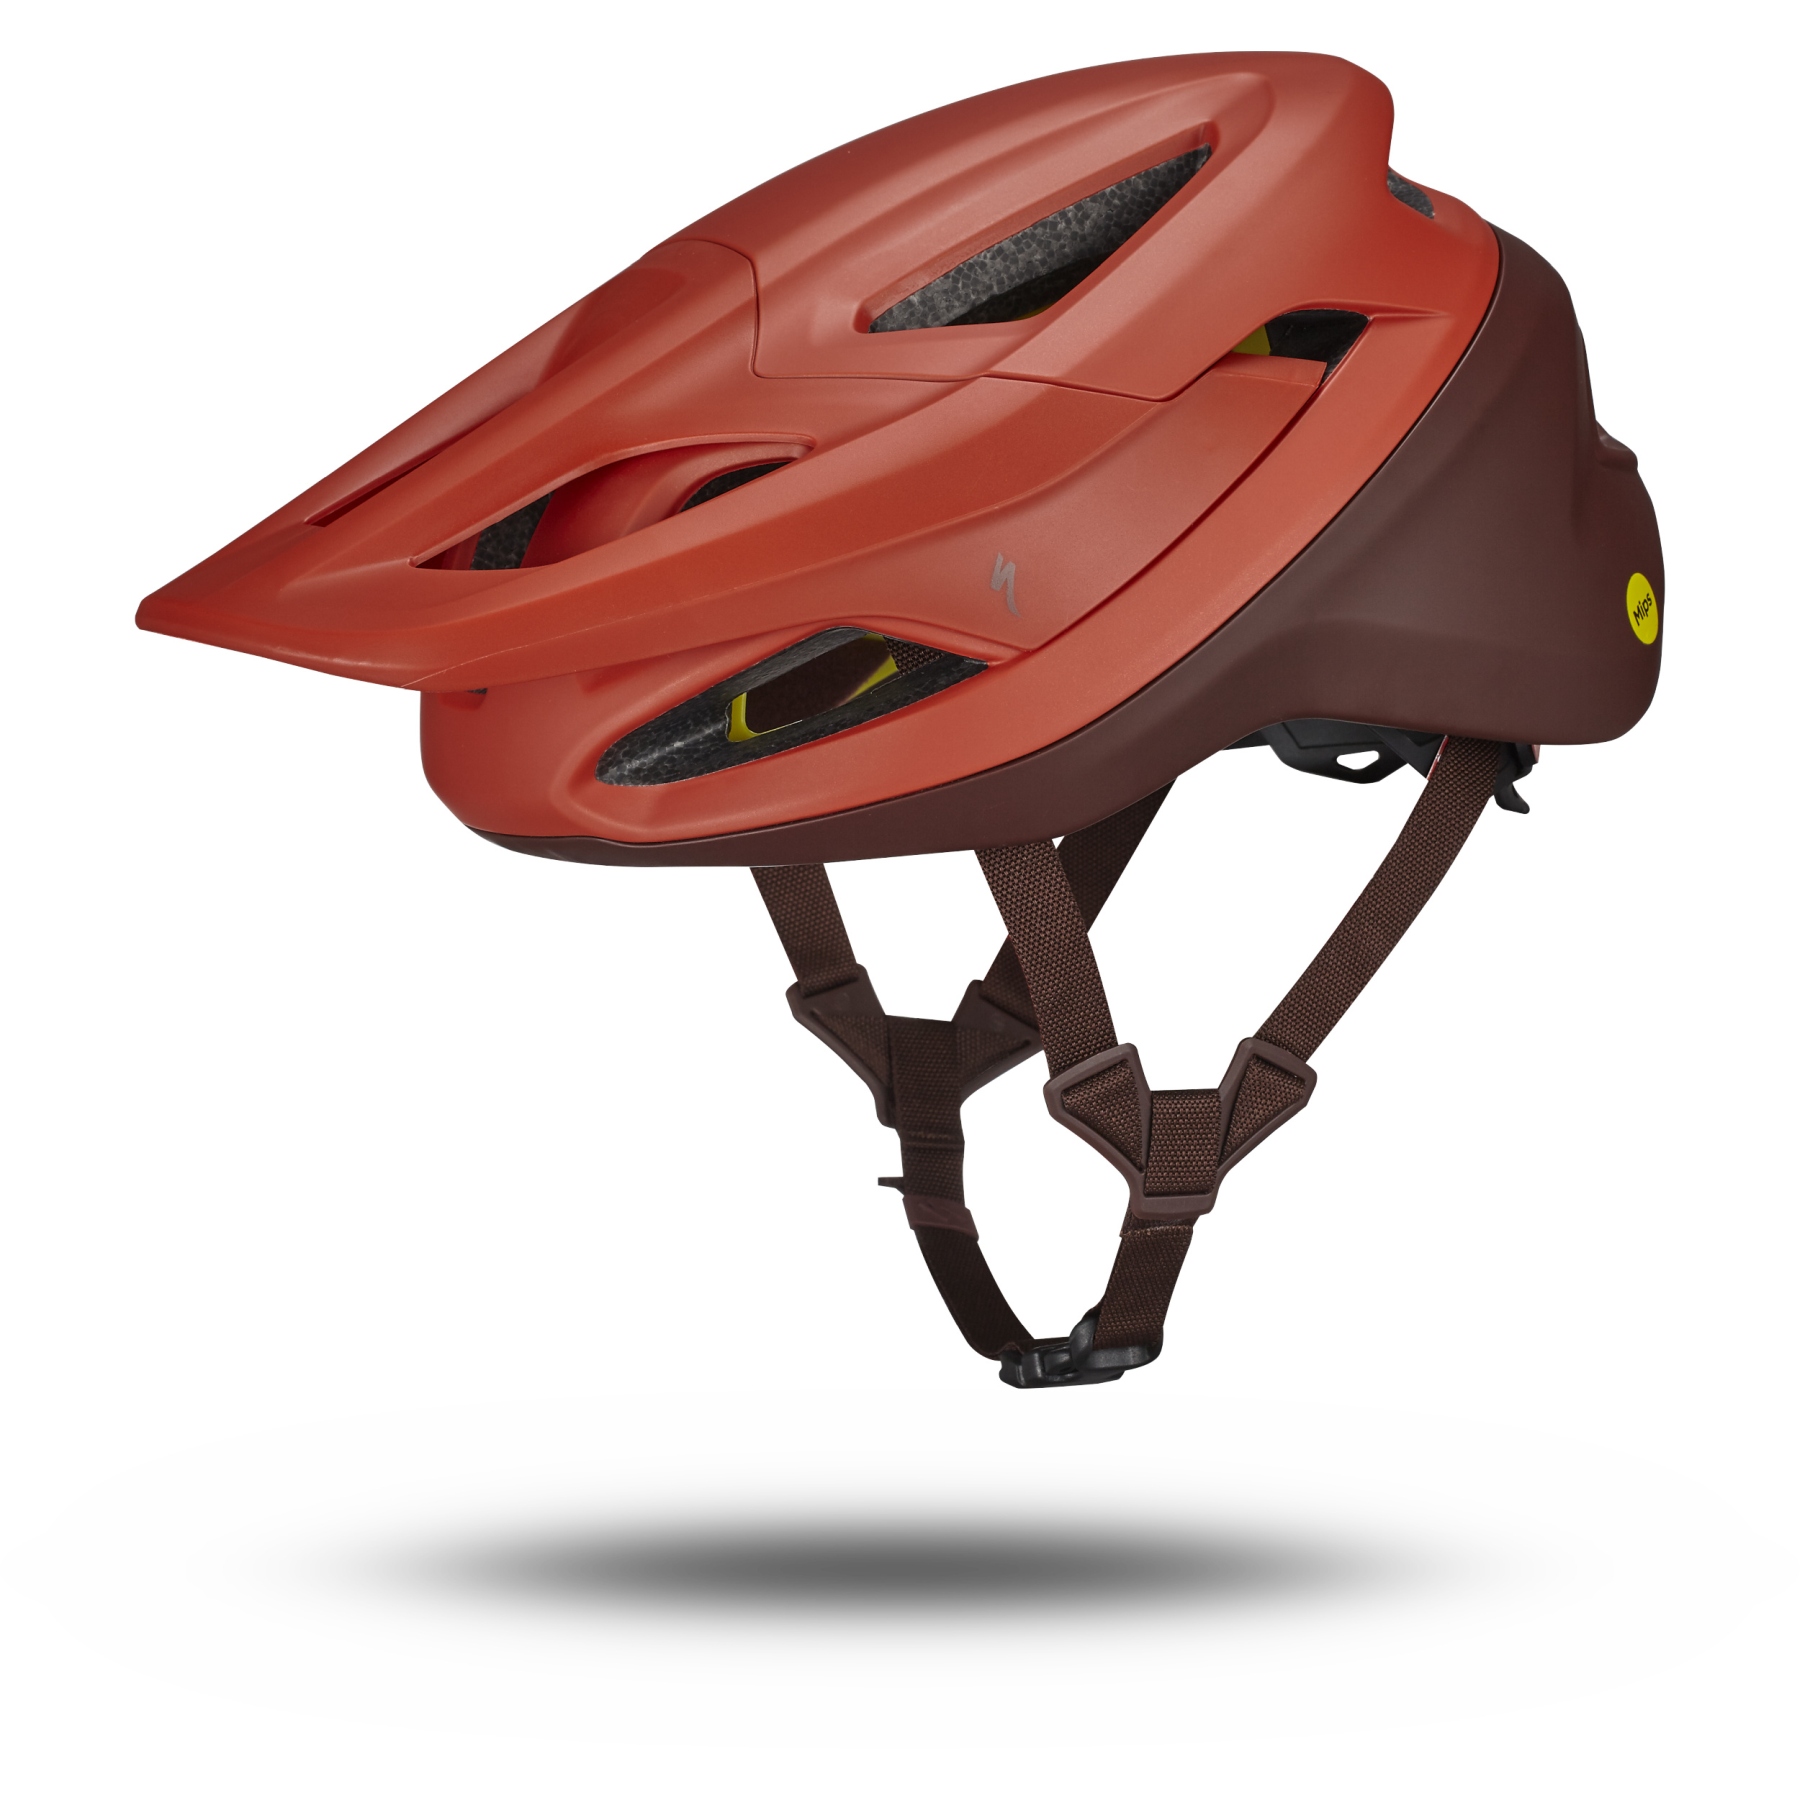 Produktbild von Specialized Camber MTB Helm - Fiery Rusted Red